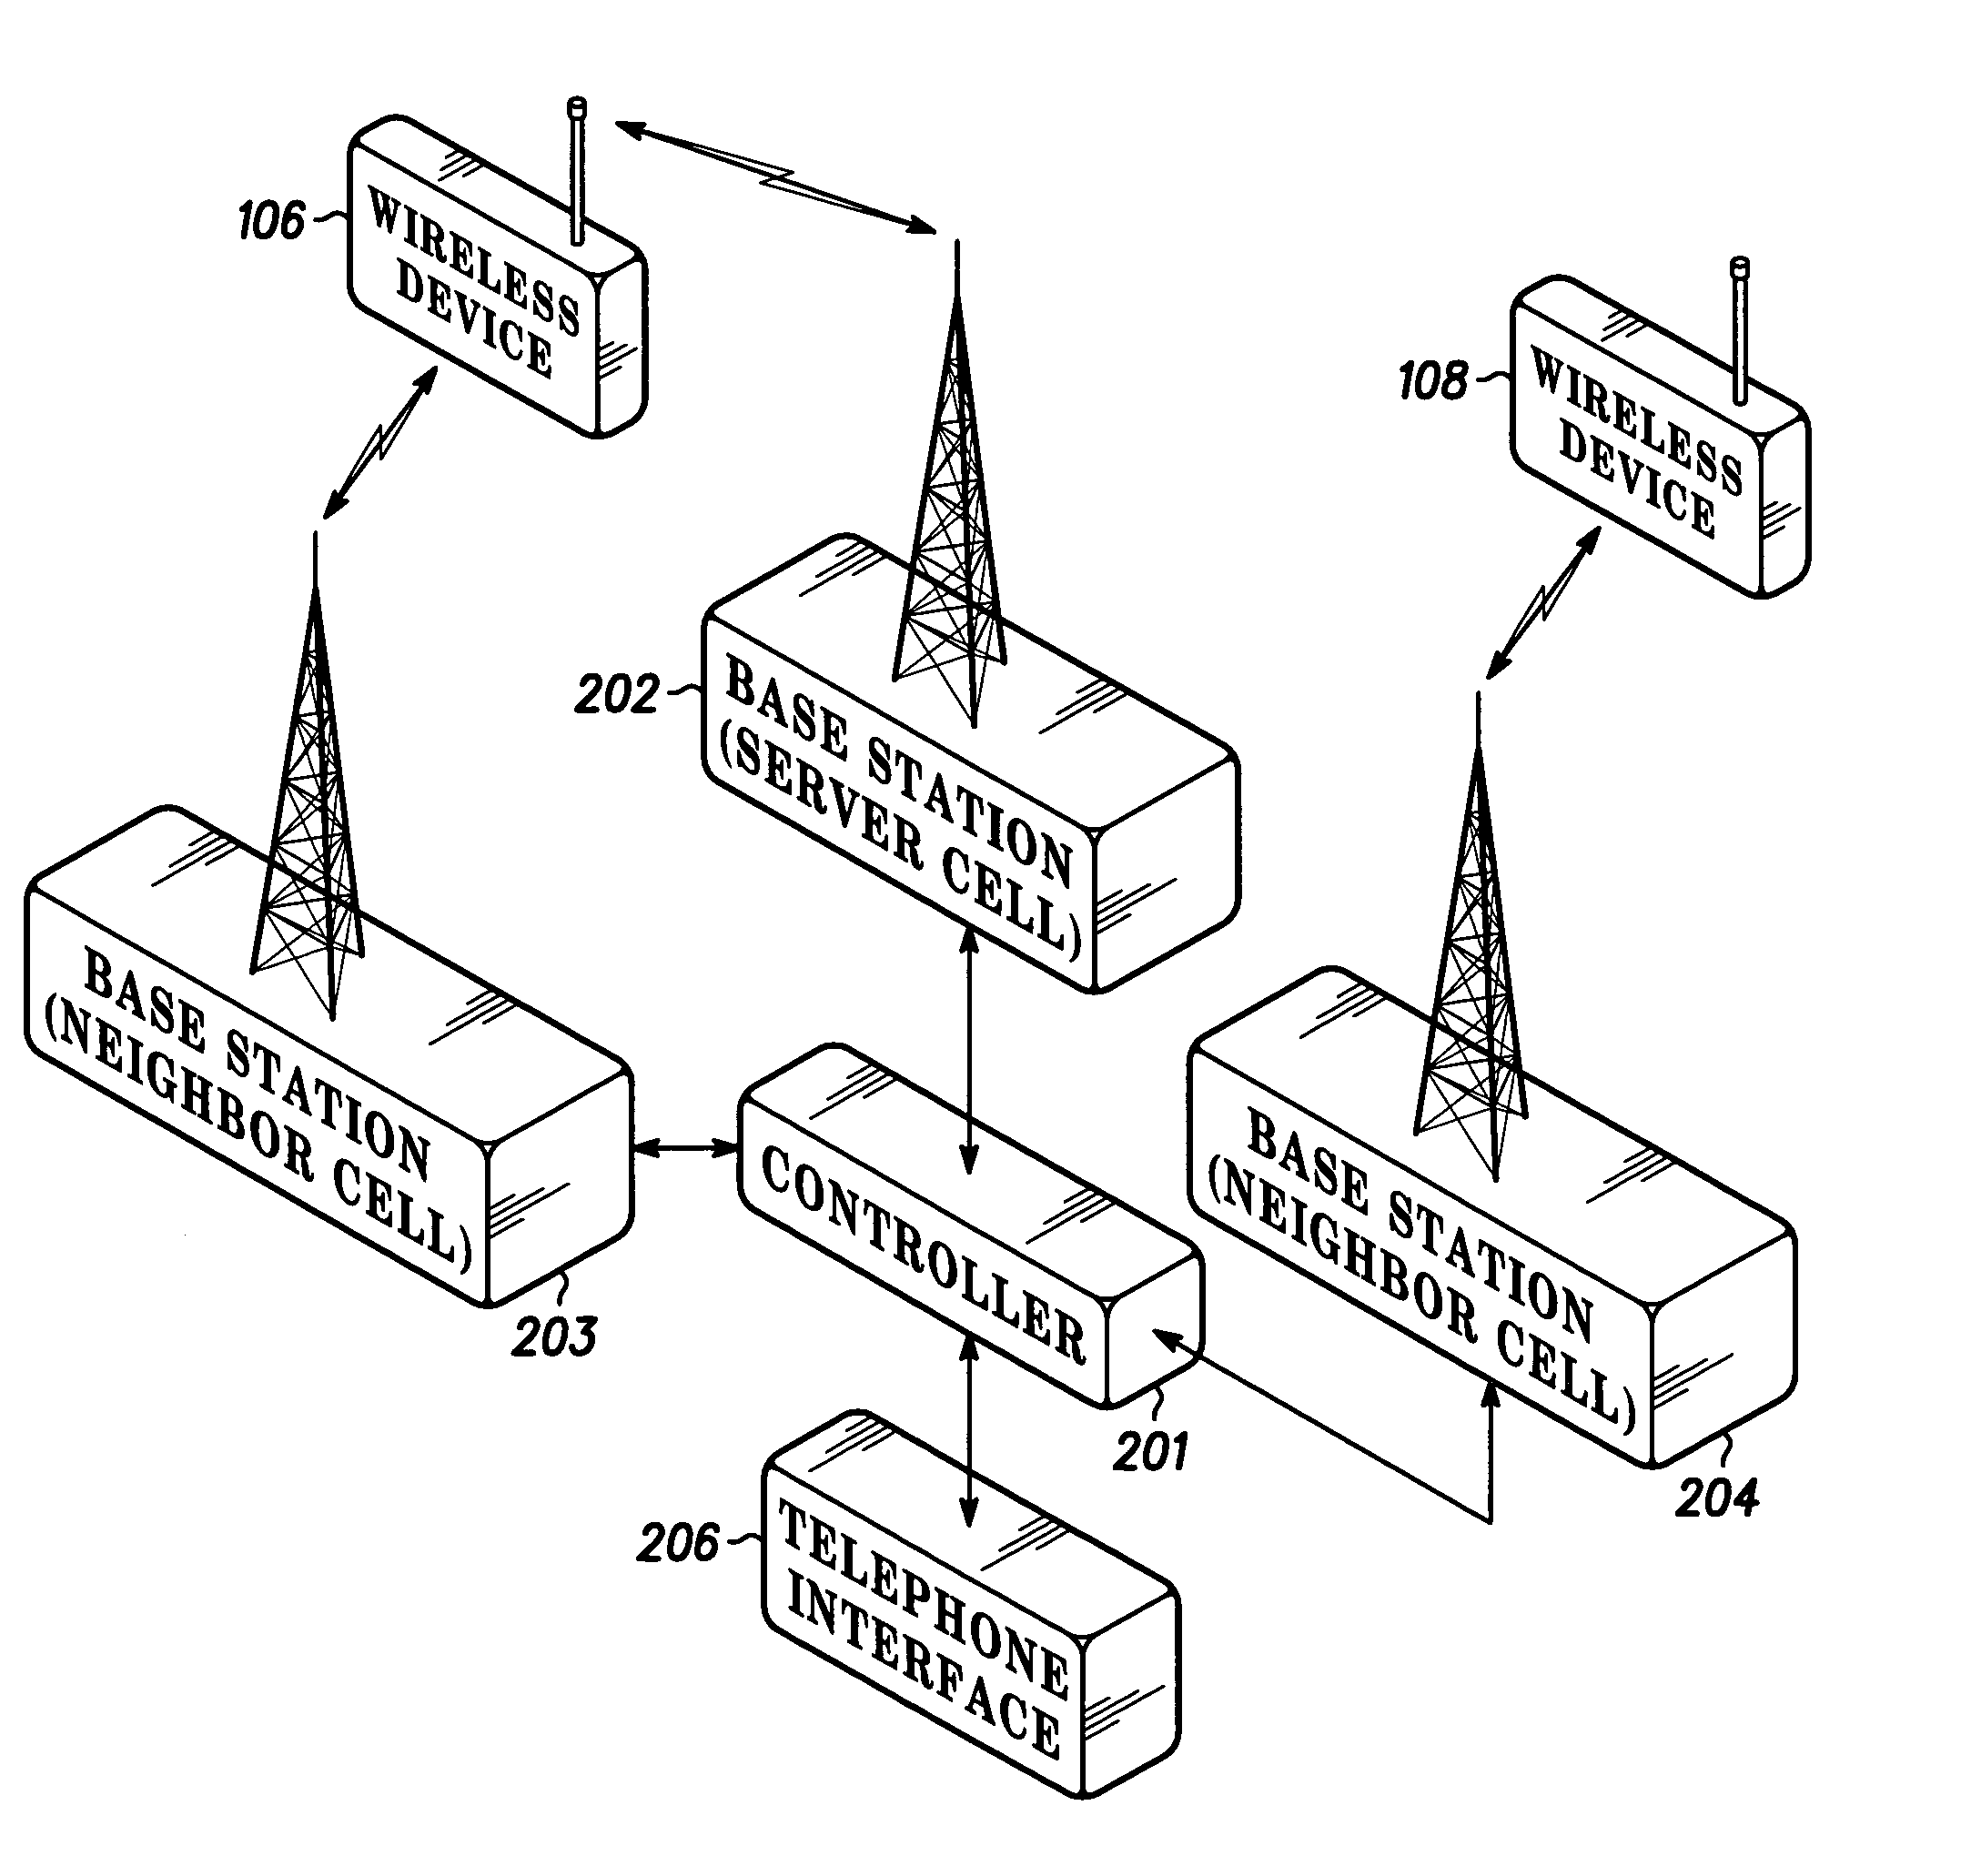 Simultaneous voice and data communication over a wireless network